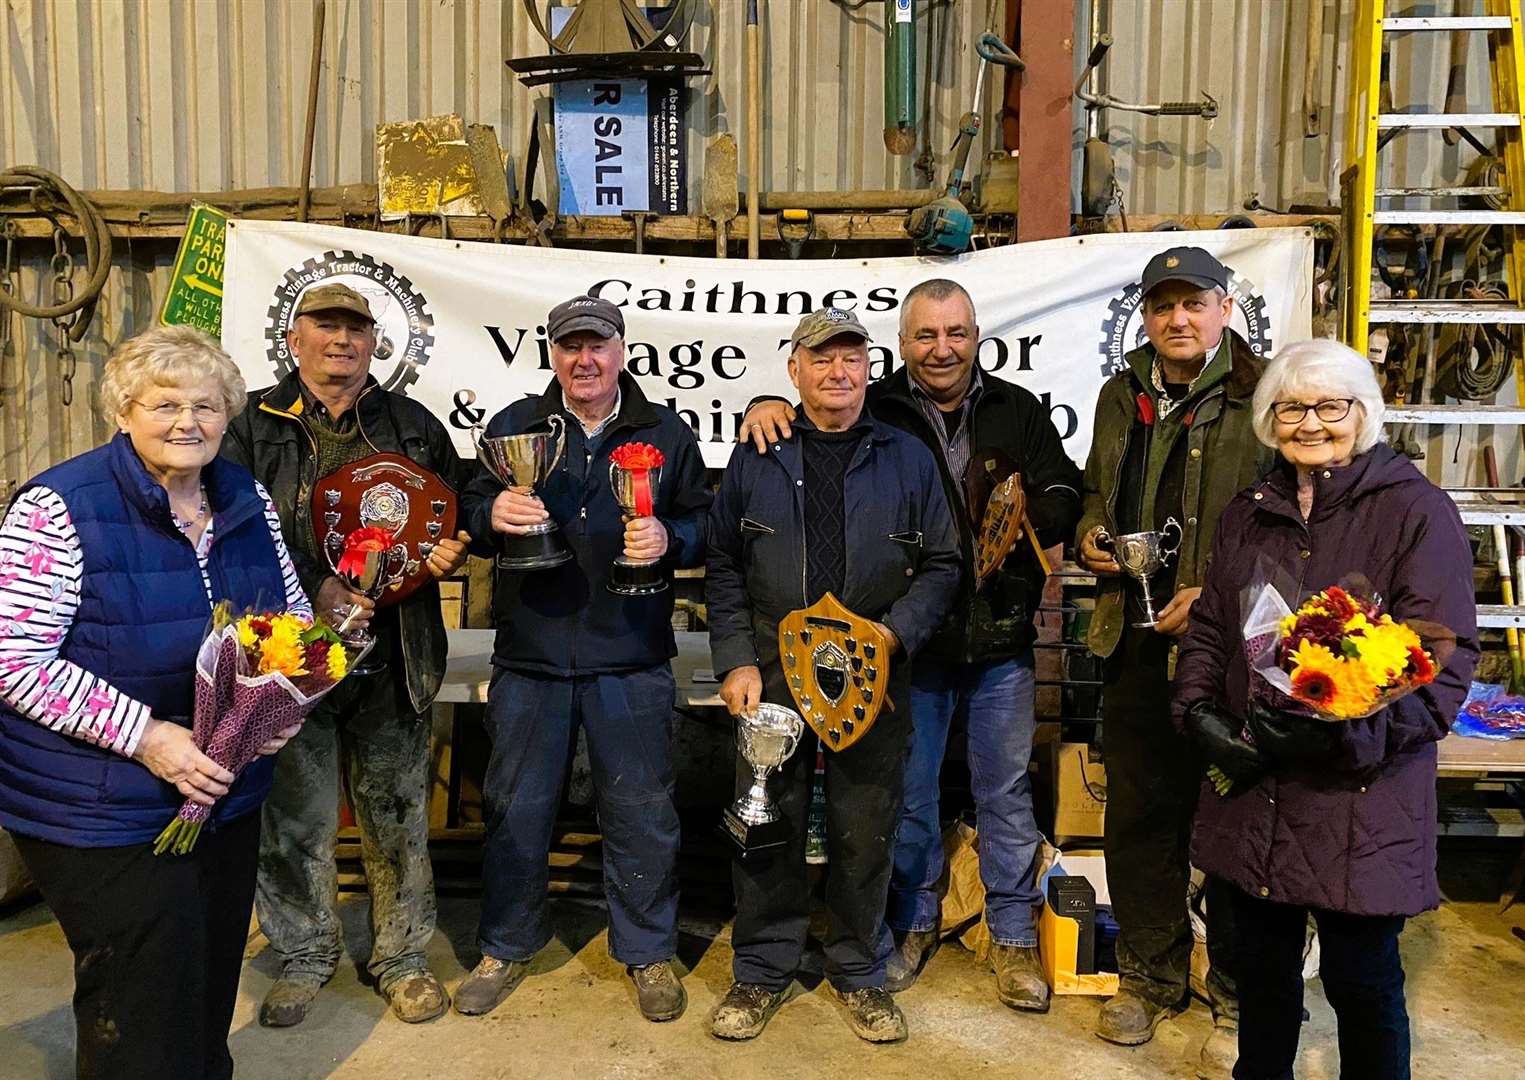 The winners with their trophies are flanked by the ladies who presented prizes. From left, Joanna Mackay, Andrew Sinclair, Gerald Macleod, Jonnie Mathieson, Martin Munro, Michael Mackay (overall winner) and Jane Fraser. Picture: Liz Hewitson